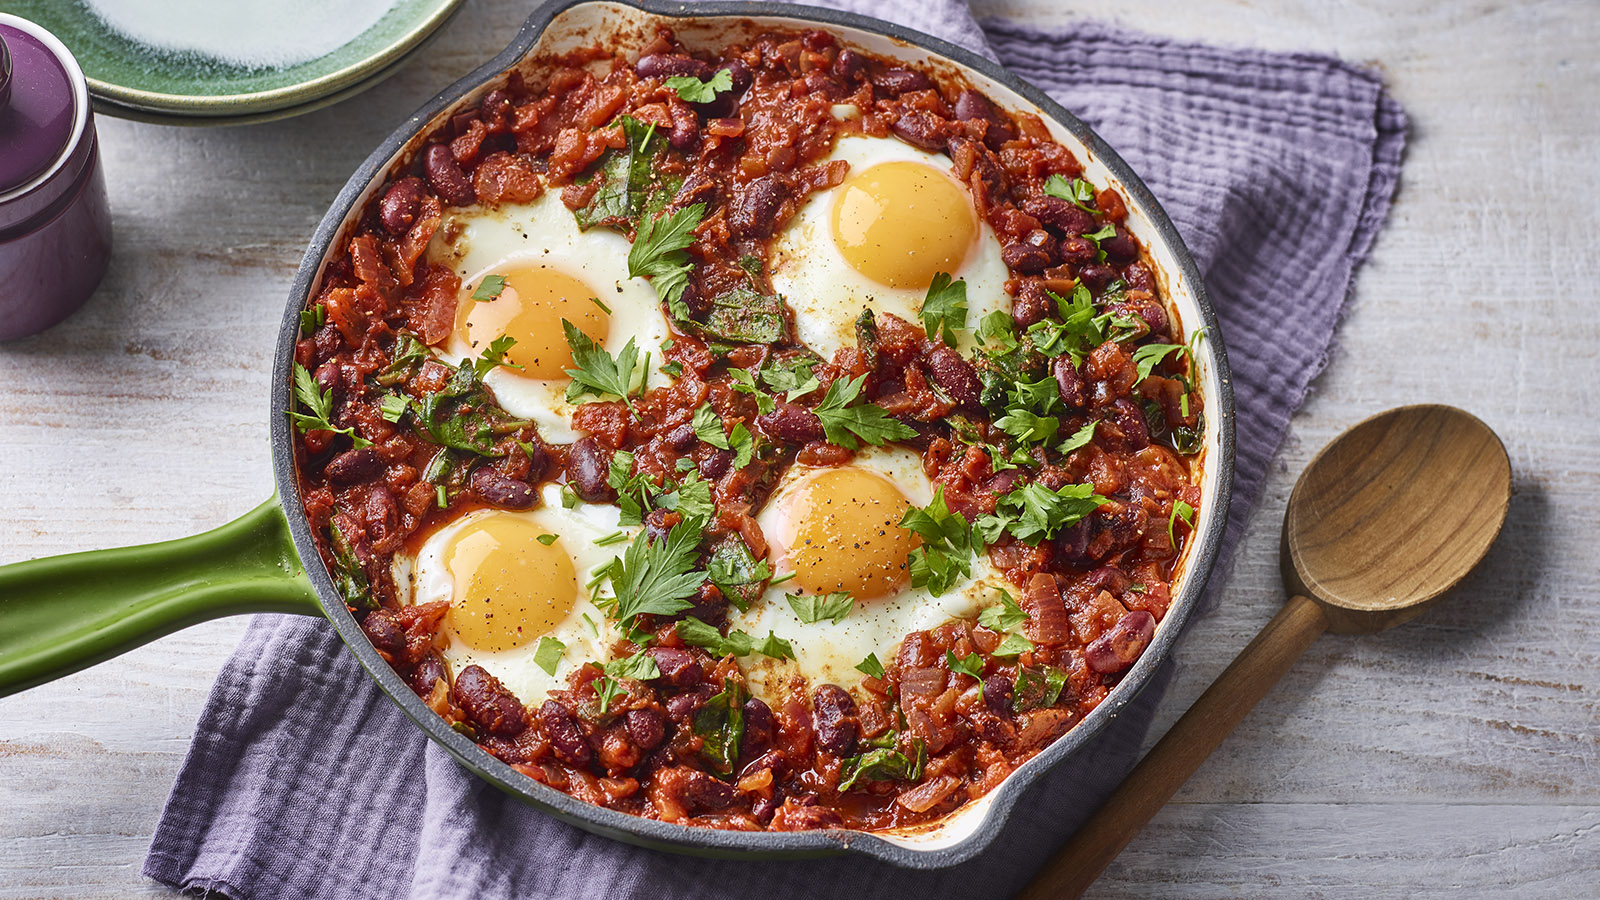 30 Best Egg Recipes to Make for Breakfast, Lunch and Dinner